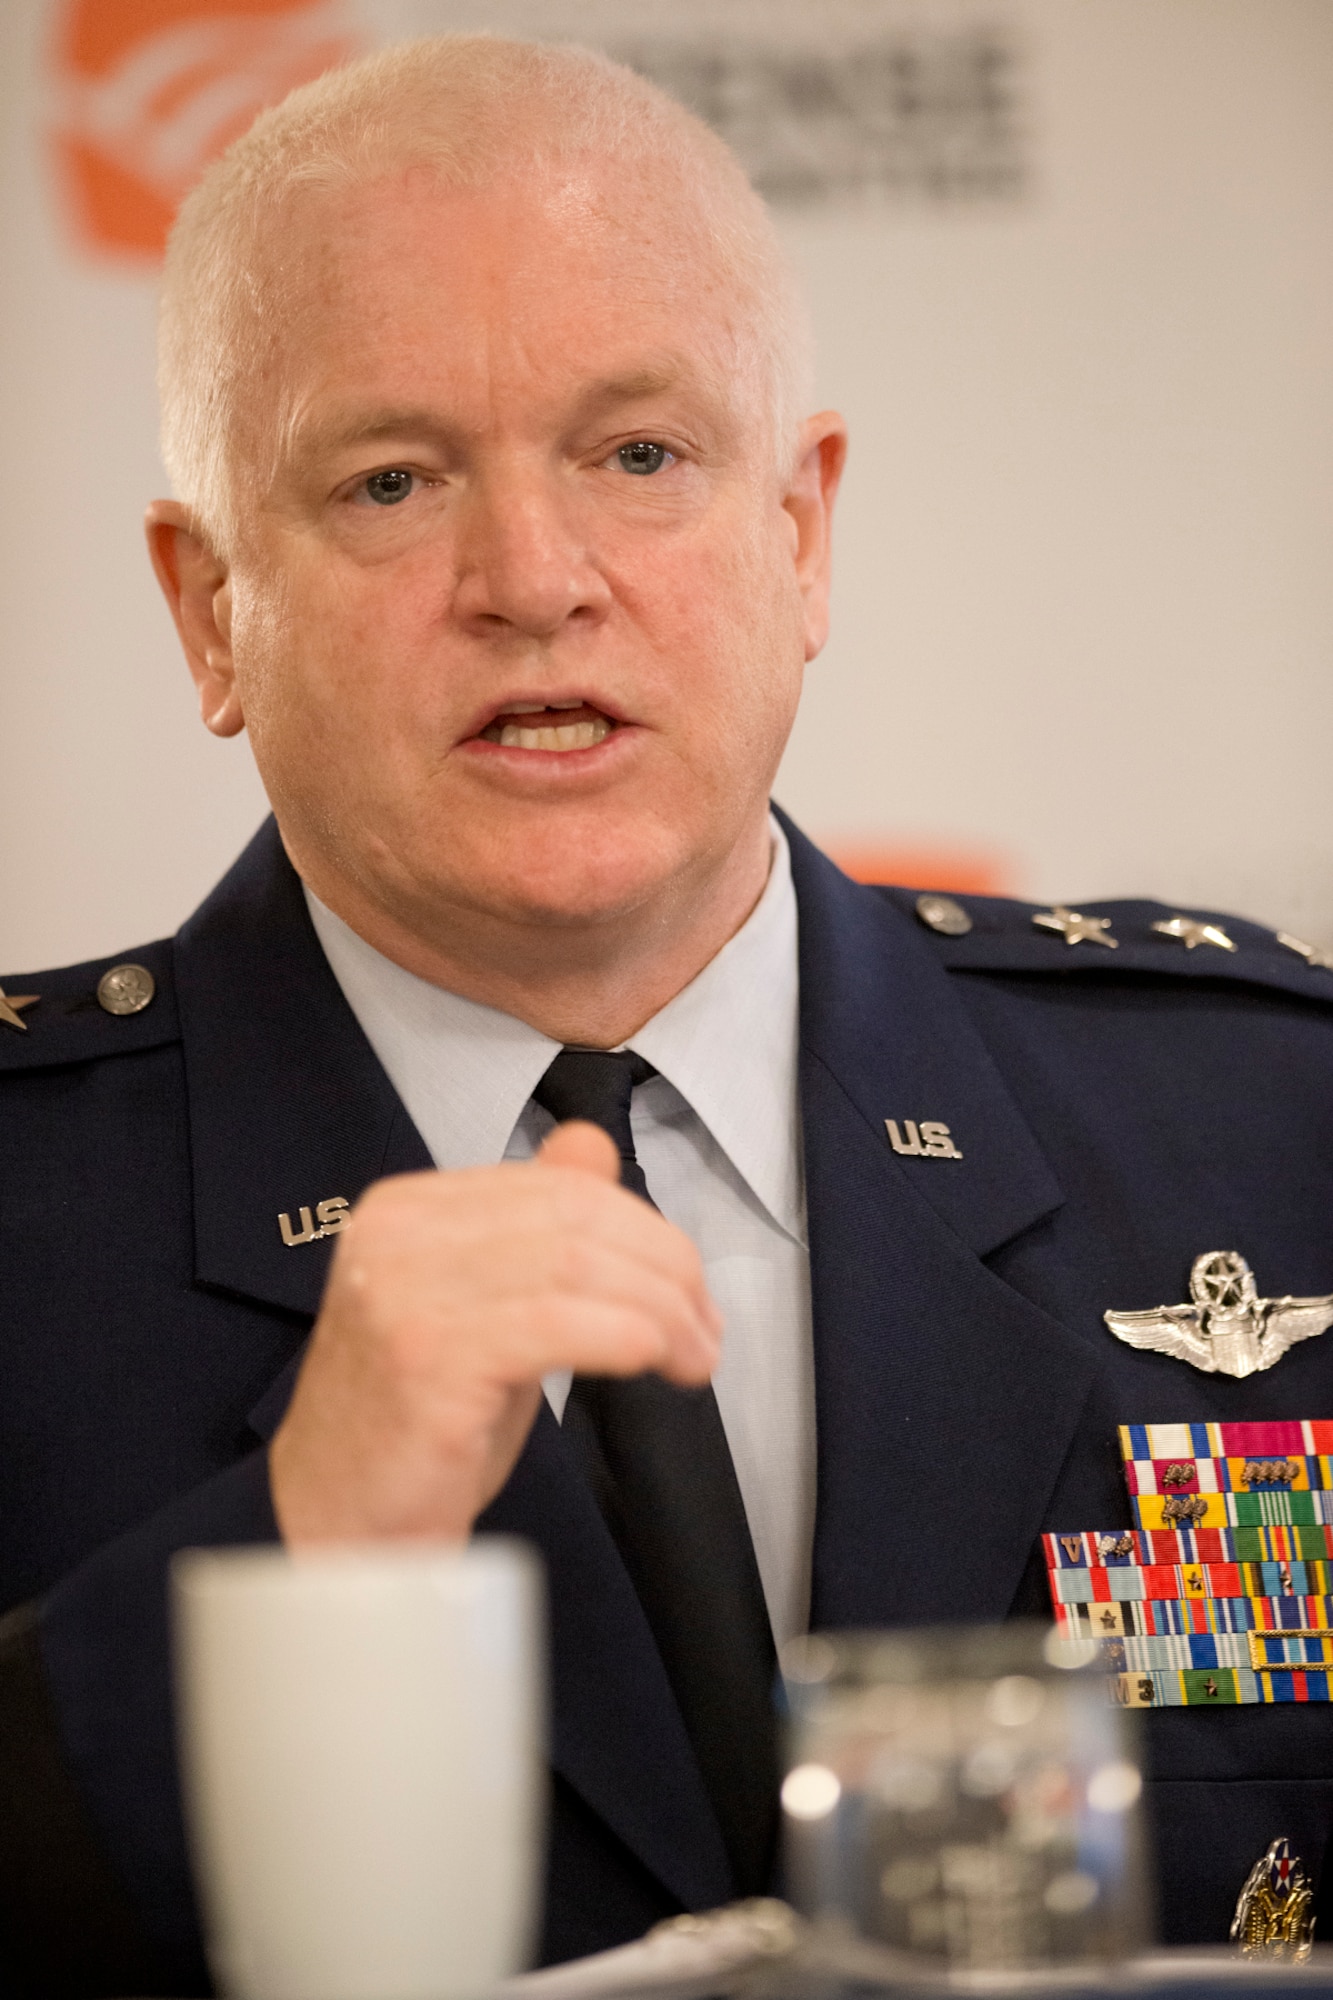 Lt. Gen. L. Scott Rice, the director of the Air National Guard makes comments during a panel discussion at the 2016 Defense Communities National Summit, held in Washington, D.C. June 20-22.The other members of the panel were Maj. Gen. Maryanne Miller, deputy to the chief of the Air Force Reserve, Headquarters USAF Washington, D.C, and Army Maj. Gen. Michael R. Smith, deputy chief, Army Reserve. (U.S. Air National Guard photo/Master Sgt. Marvin R. Preston/Released)